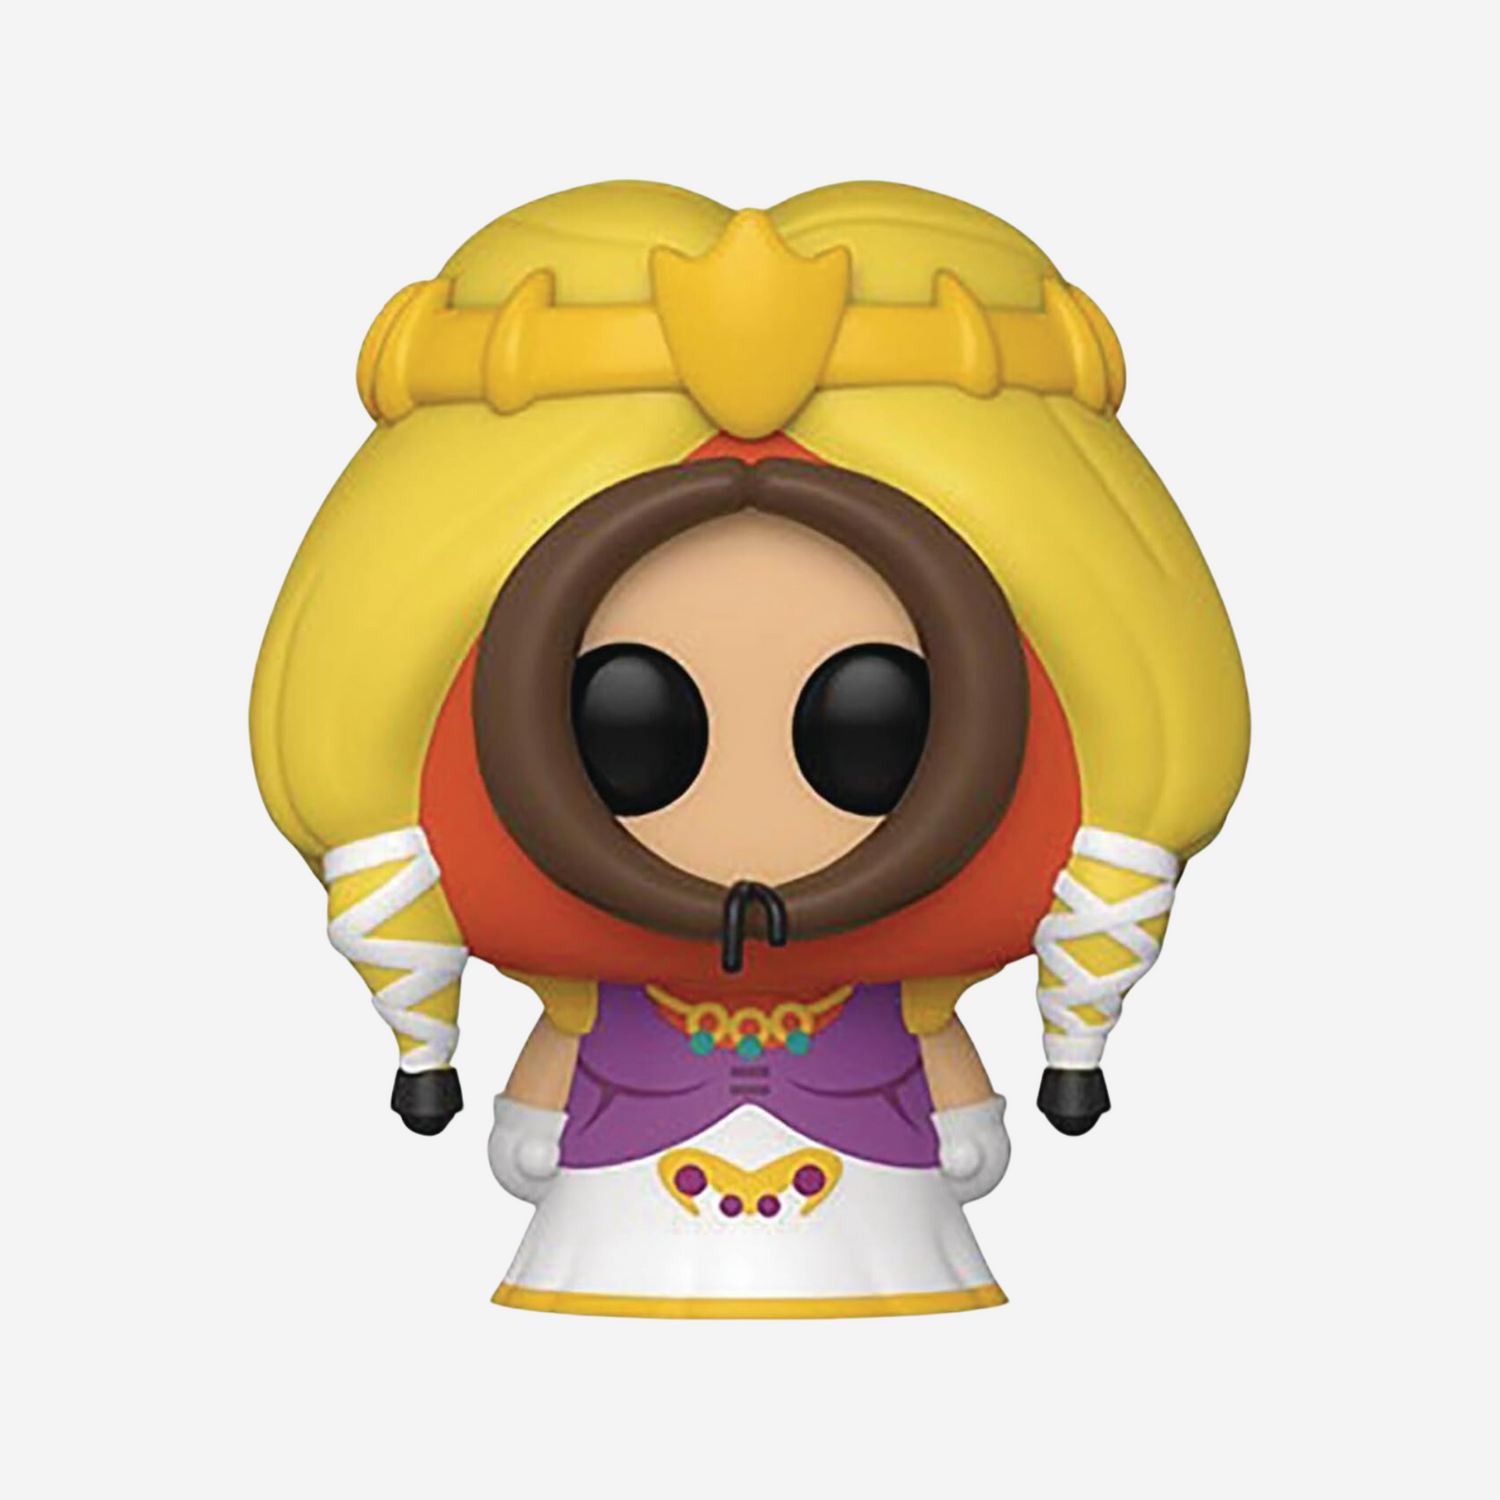 Funko Pop! Animation: South Park - Princess Kenny, 3.75 inches